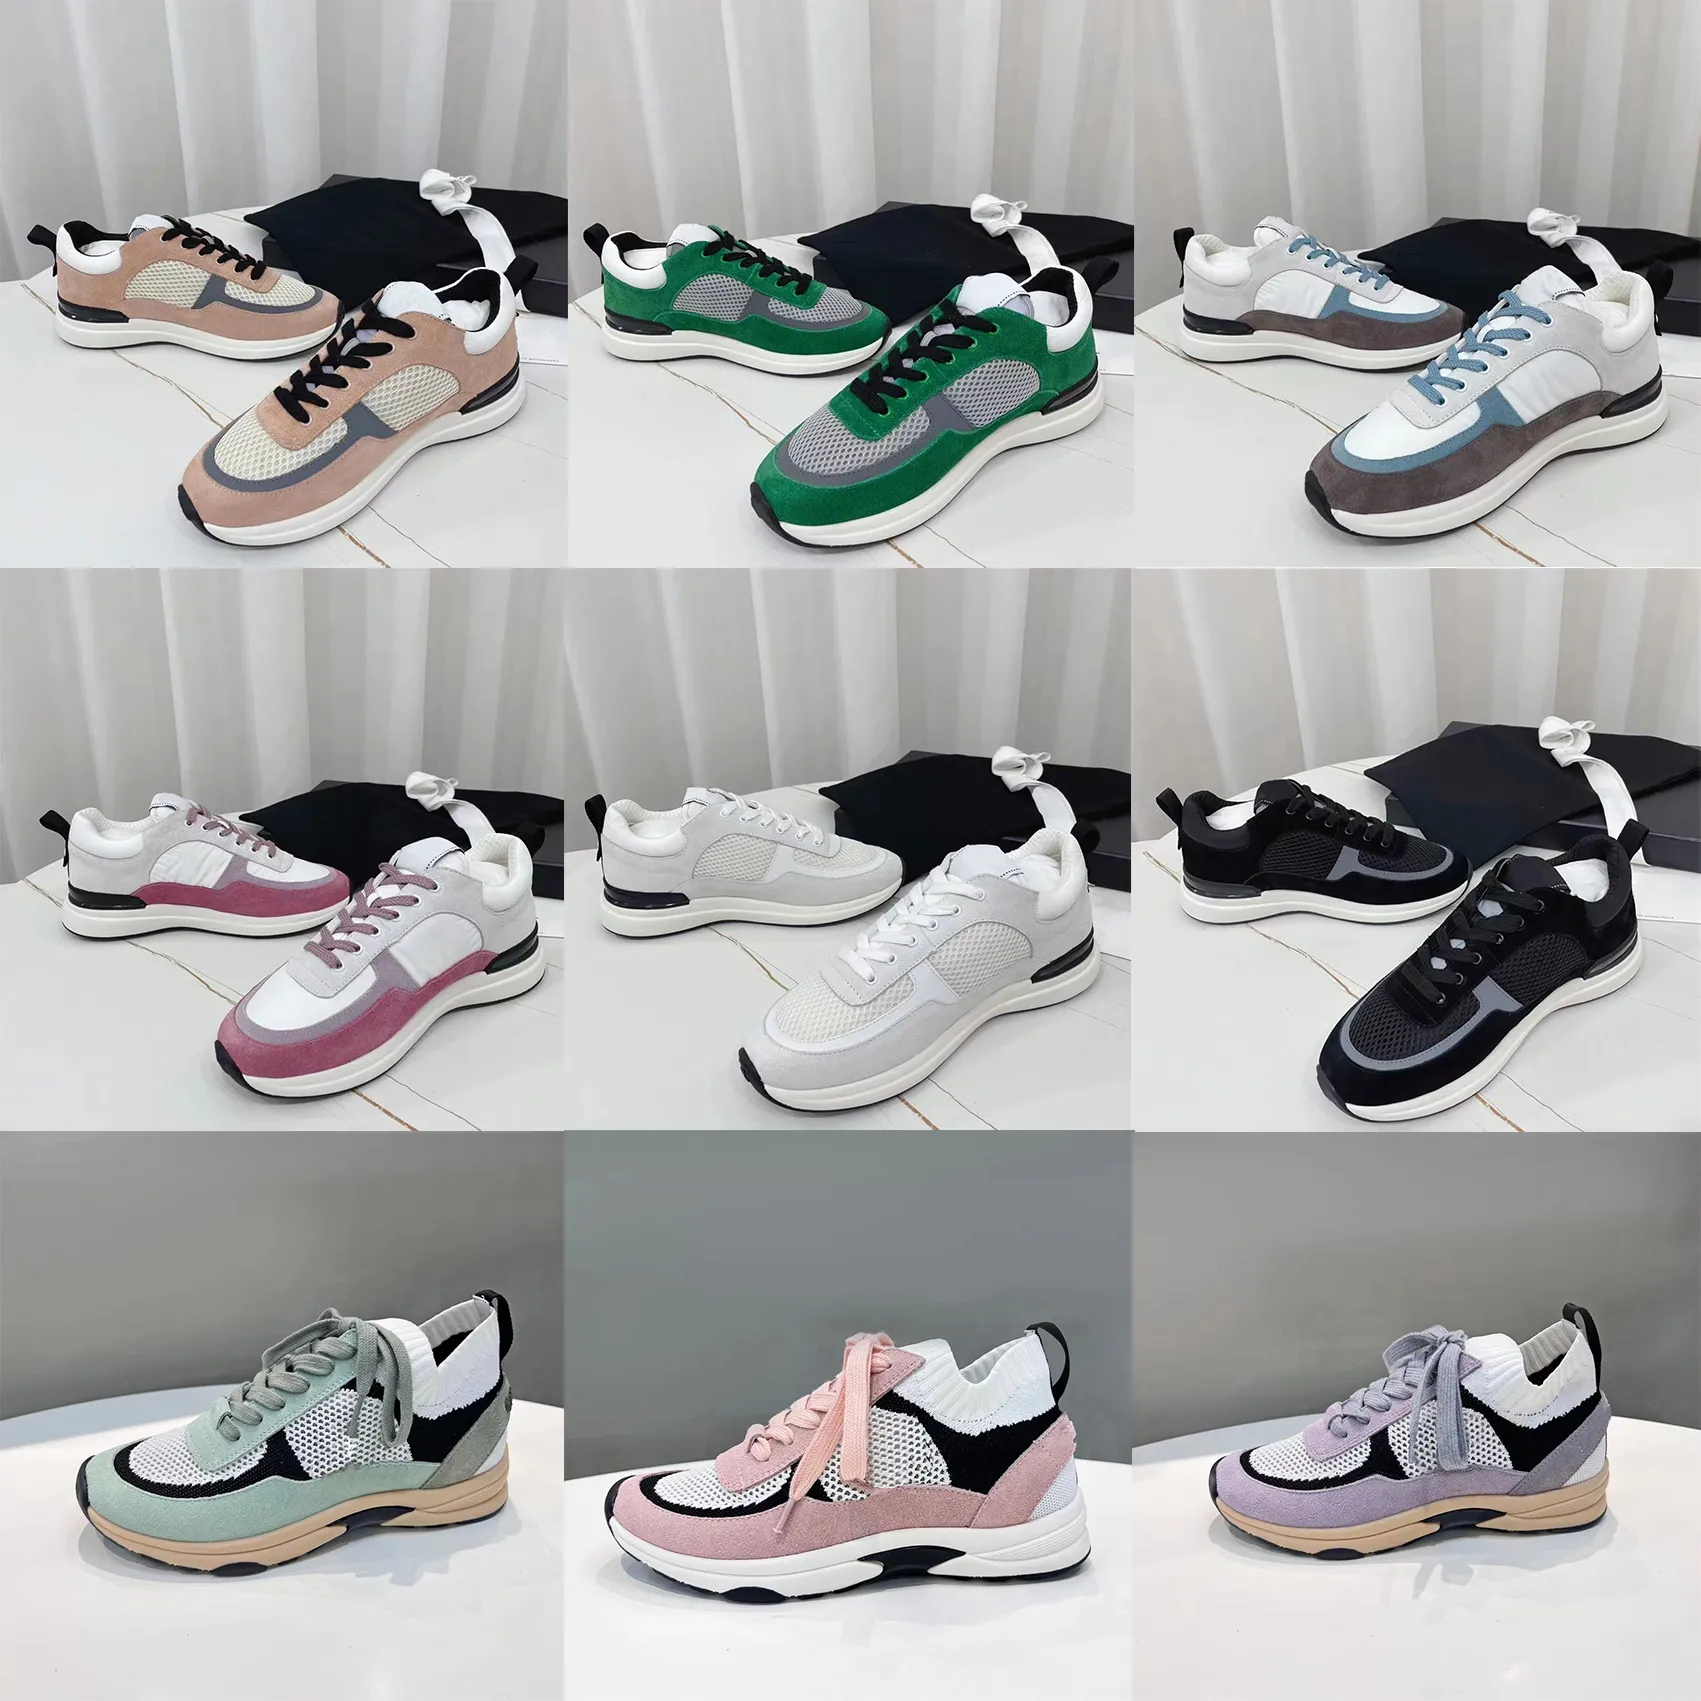 Women's sneakers| Casual shoes | Trendy sneakers | Comfortable footwear |  Casual fashion | Latest